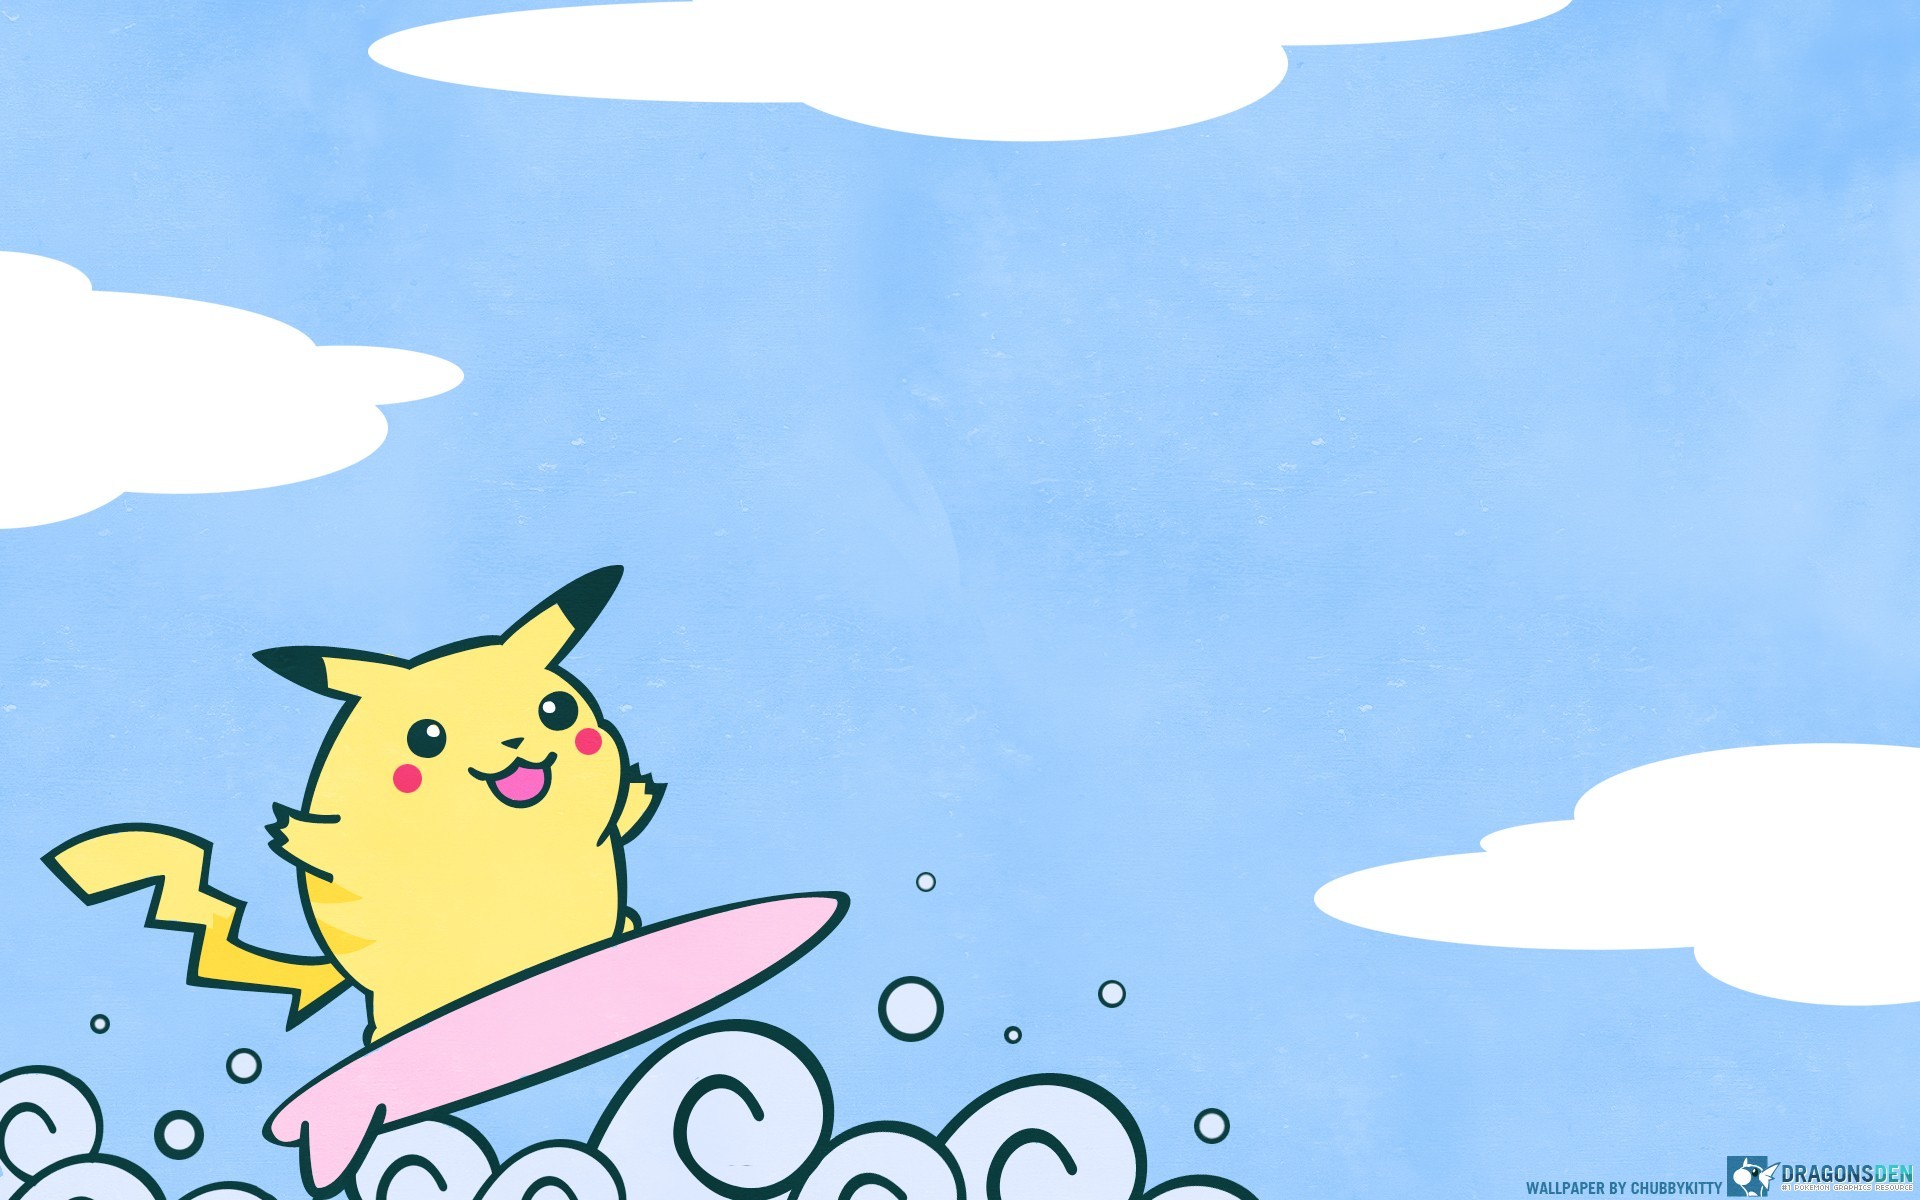 1920x1200 Wallpaper, Surfing Pikachu iPhone Wallpaper, Surfing Pikachu Android .